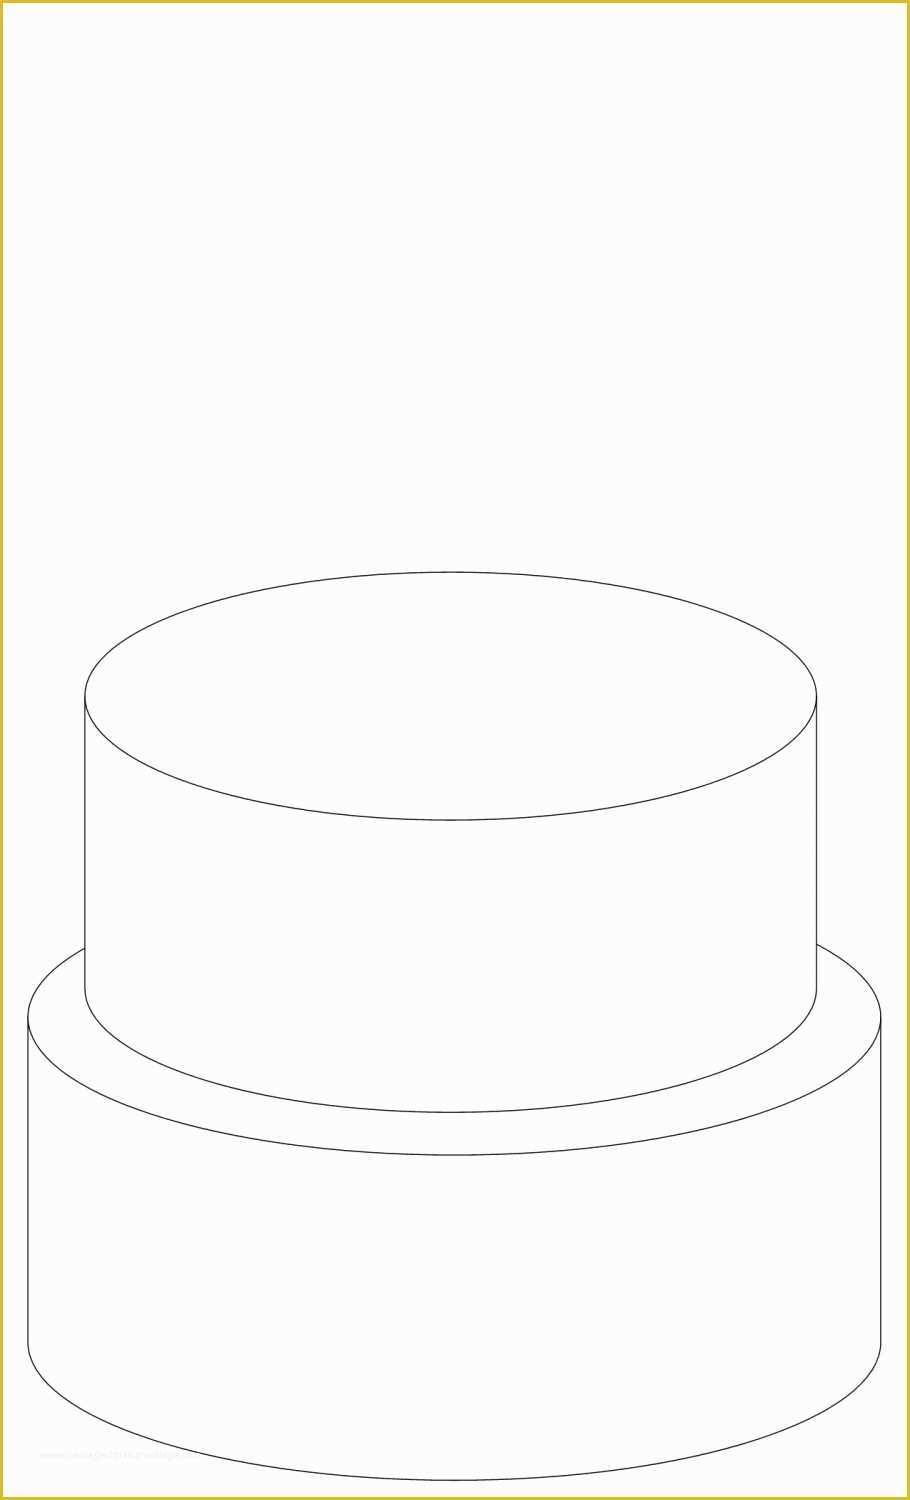 Free Printable Cake Templates Of 6 Best Of 2 Tier Cake Templates Printable 2 Tier